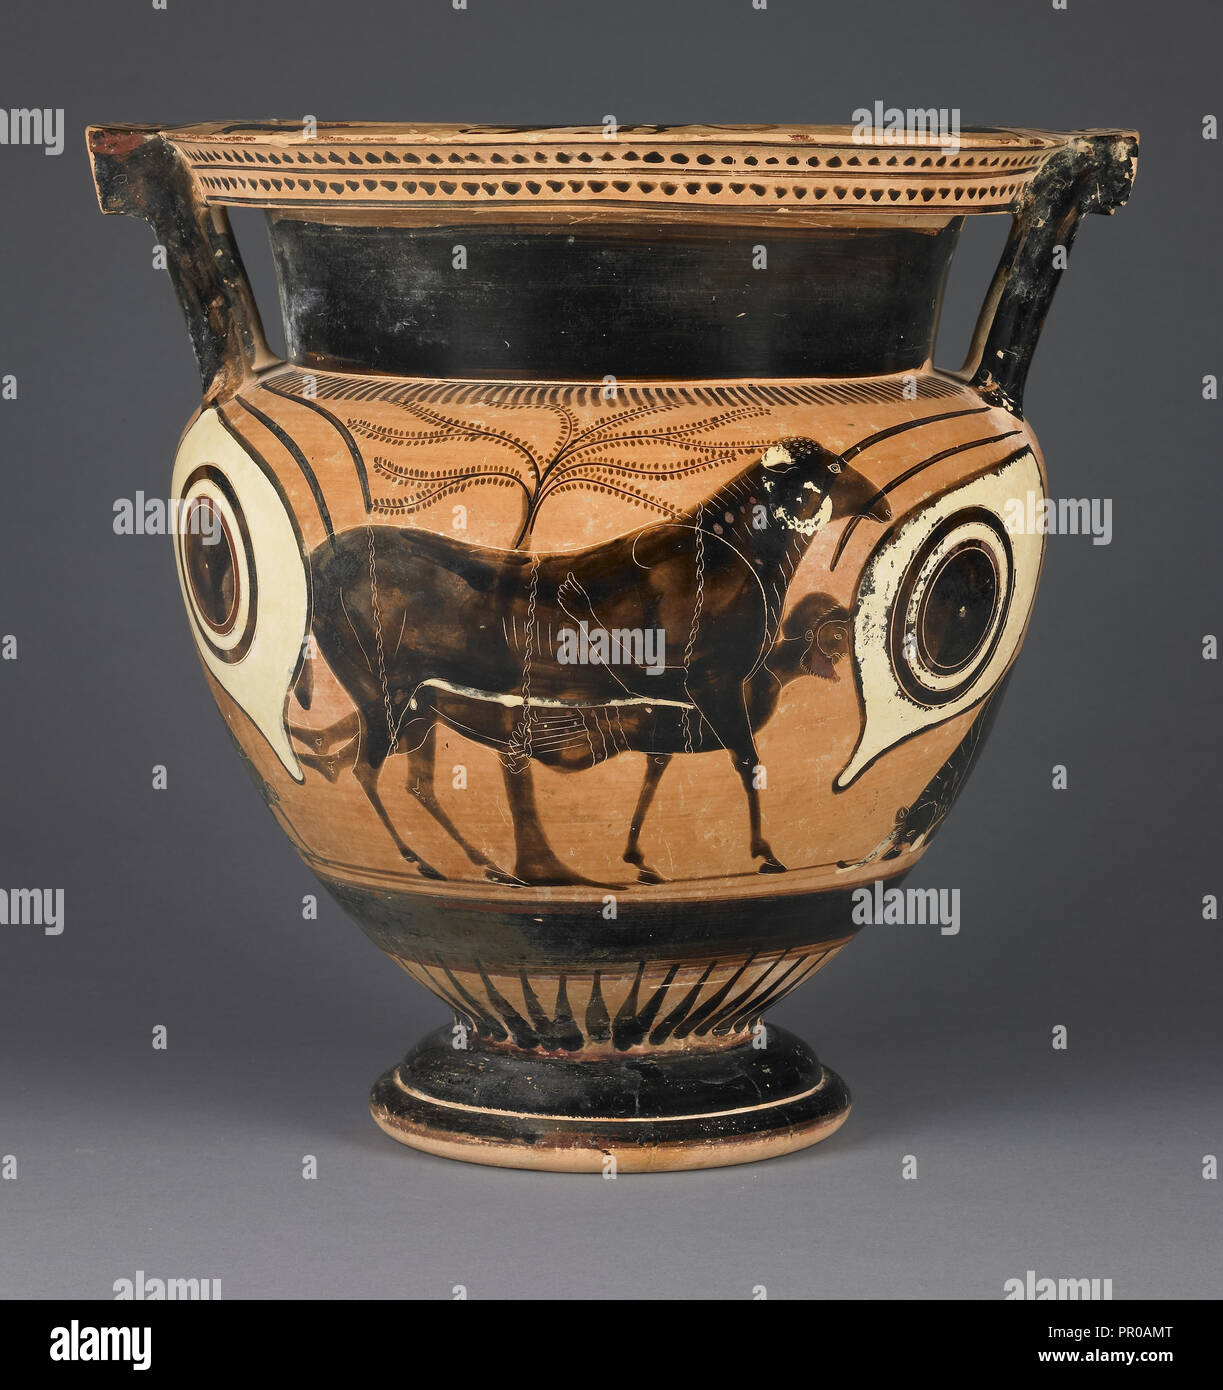 Mixing Vessel with Odysseus Escaping from the Cyclops's Cave; Athens, Greece; second half of 6th century B.C; Terracotta Stock Photo